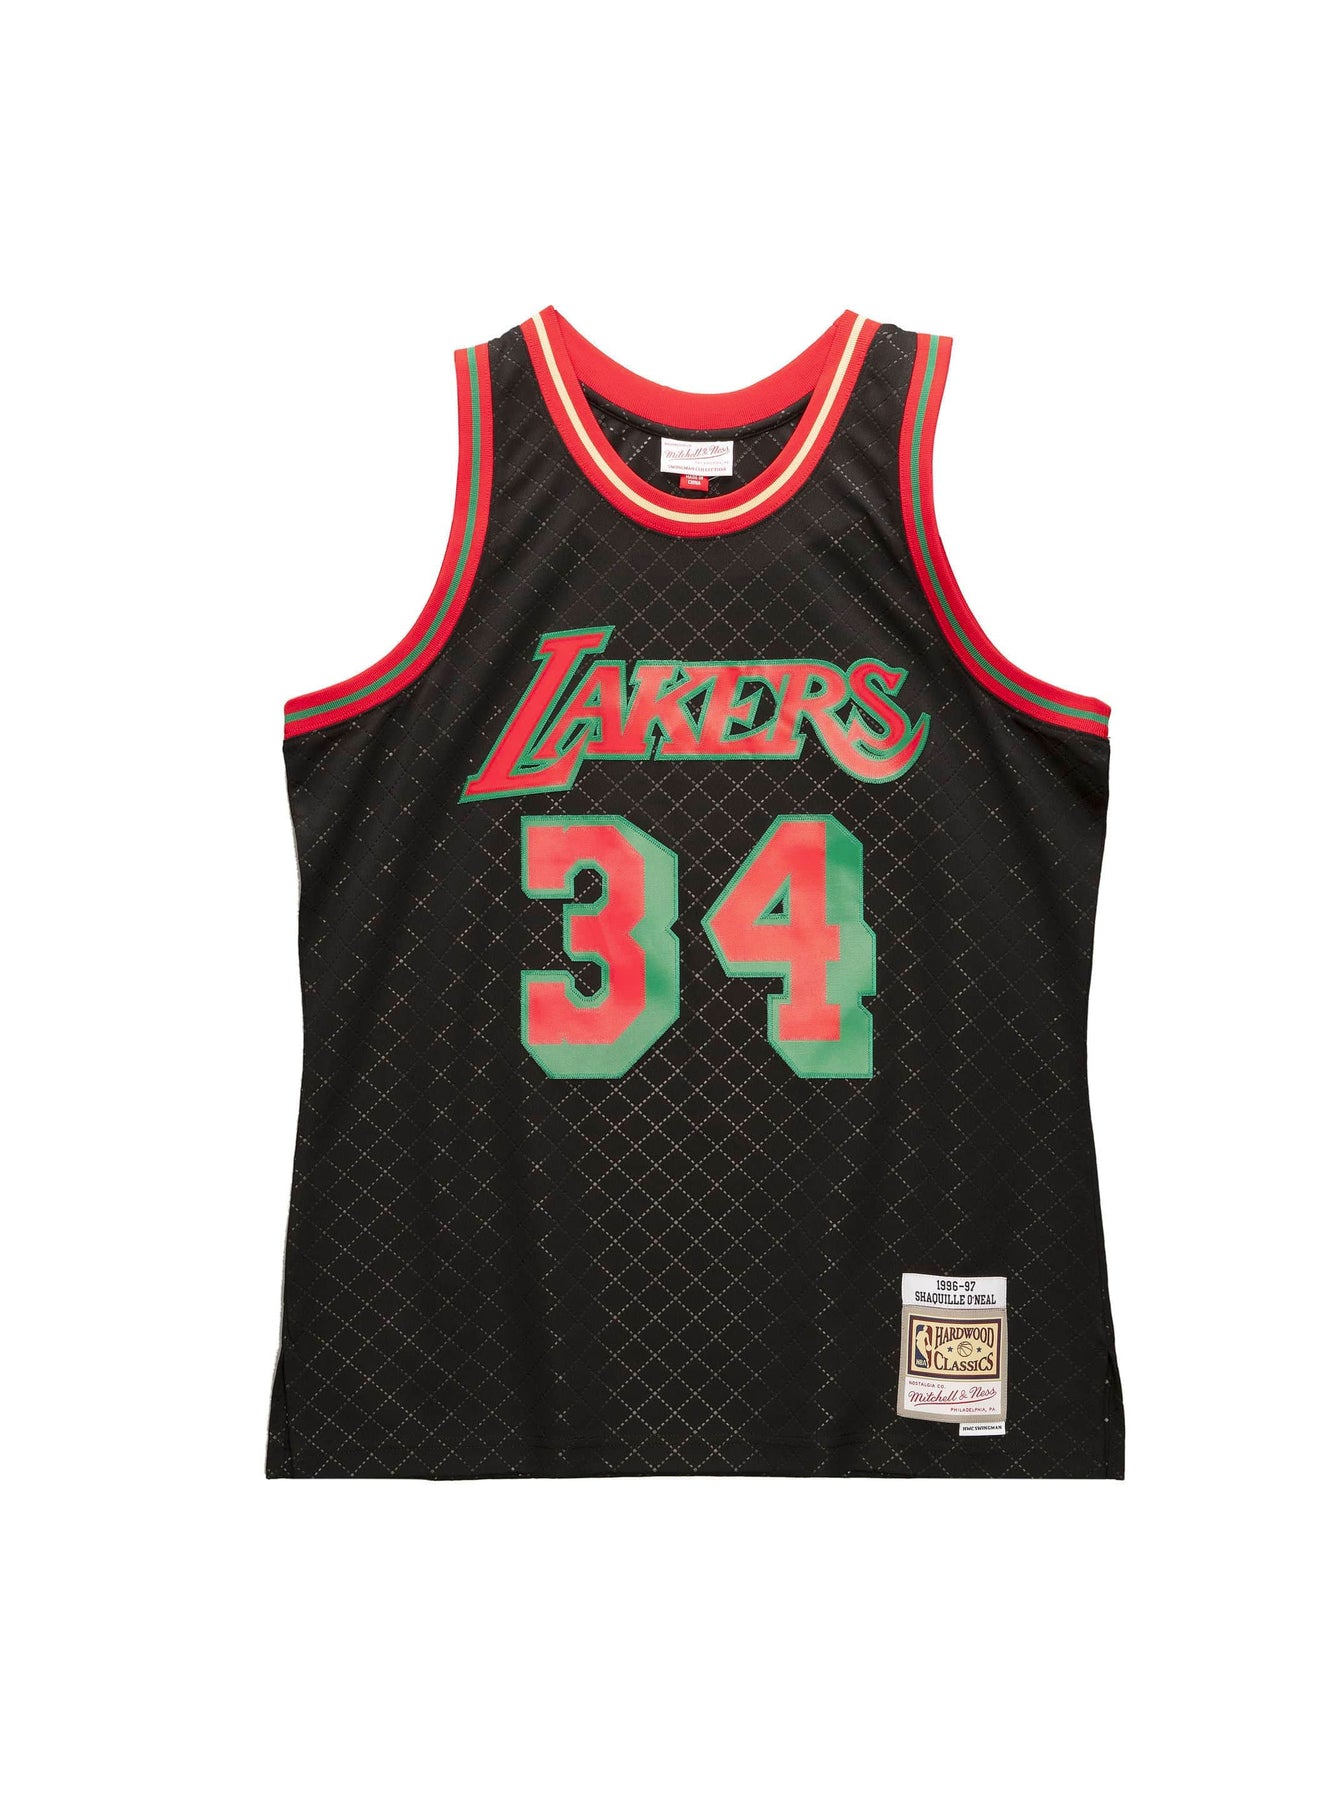 MITCHELL & NESS HARDWOOD CLASSICS LAKERS SHAQUILLE O'NEIL 34